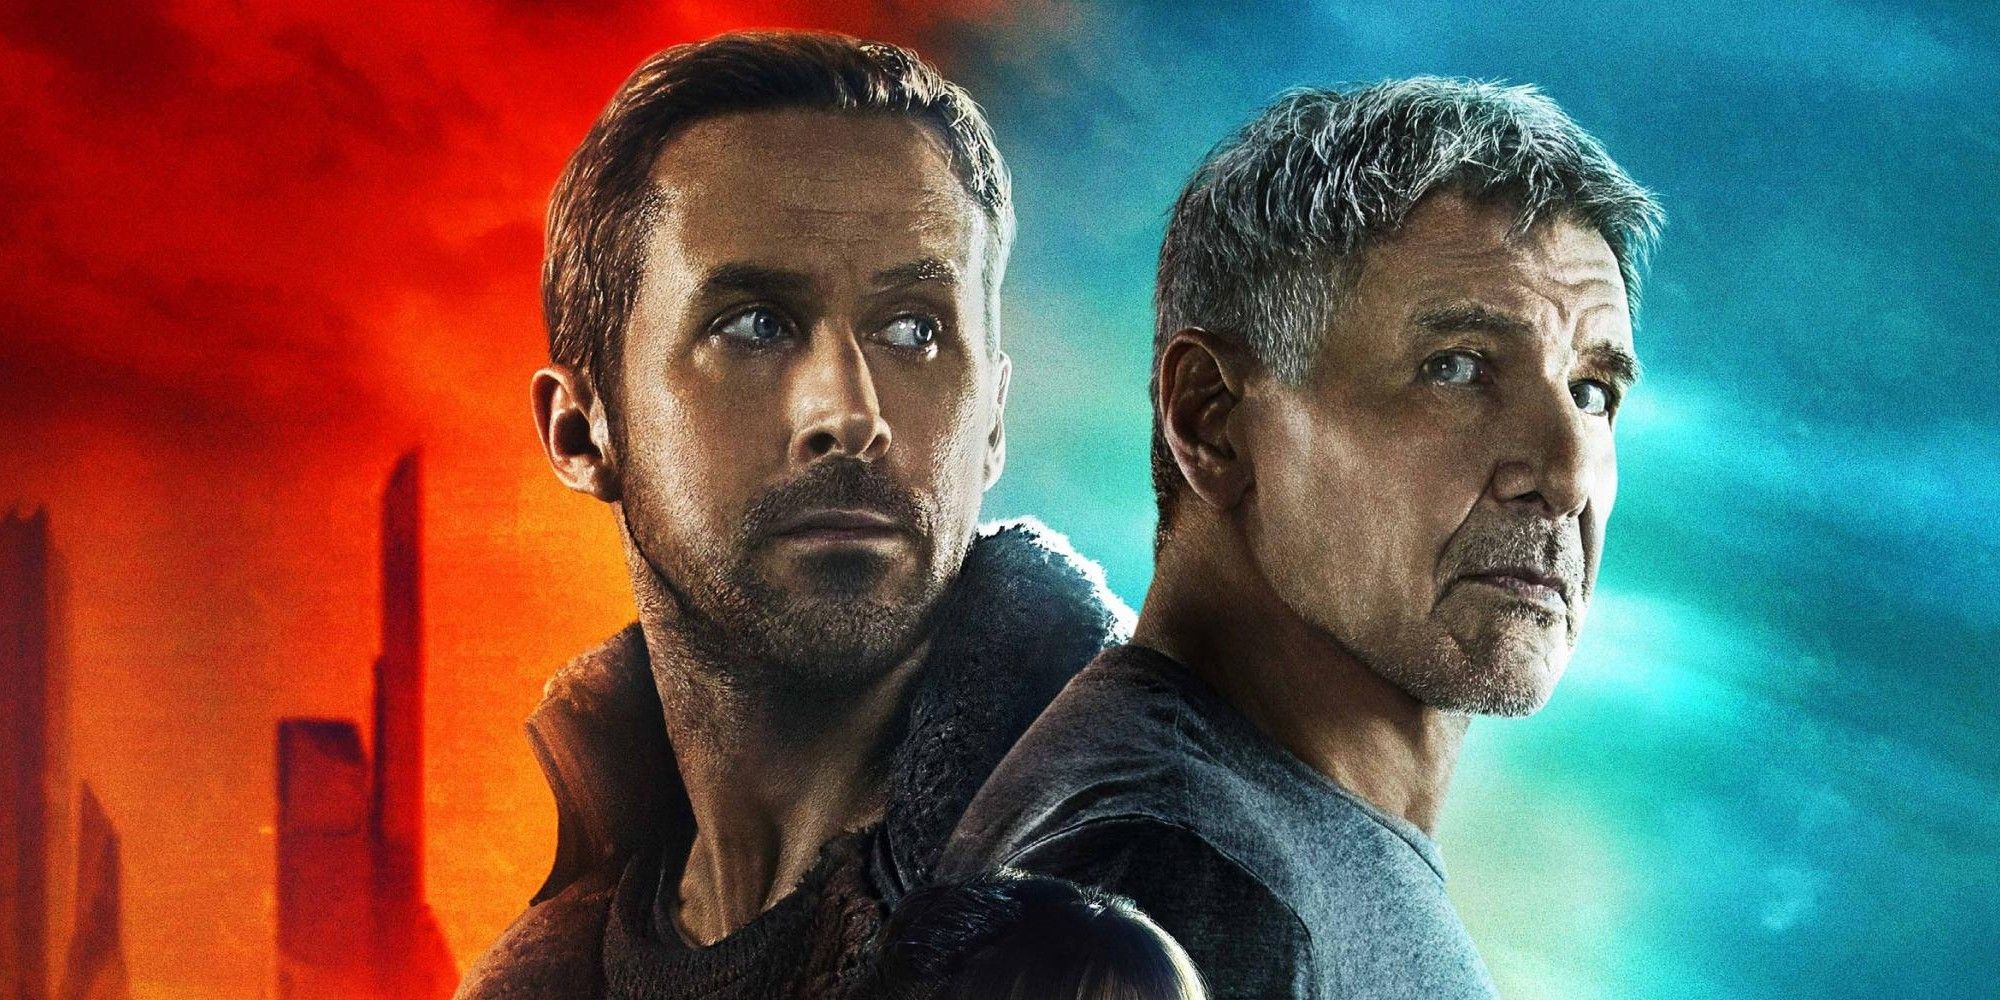 Blade Runner 2049 poster featuring Harrison Ford and Ryan Gosling